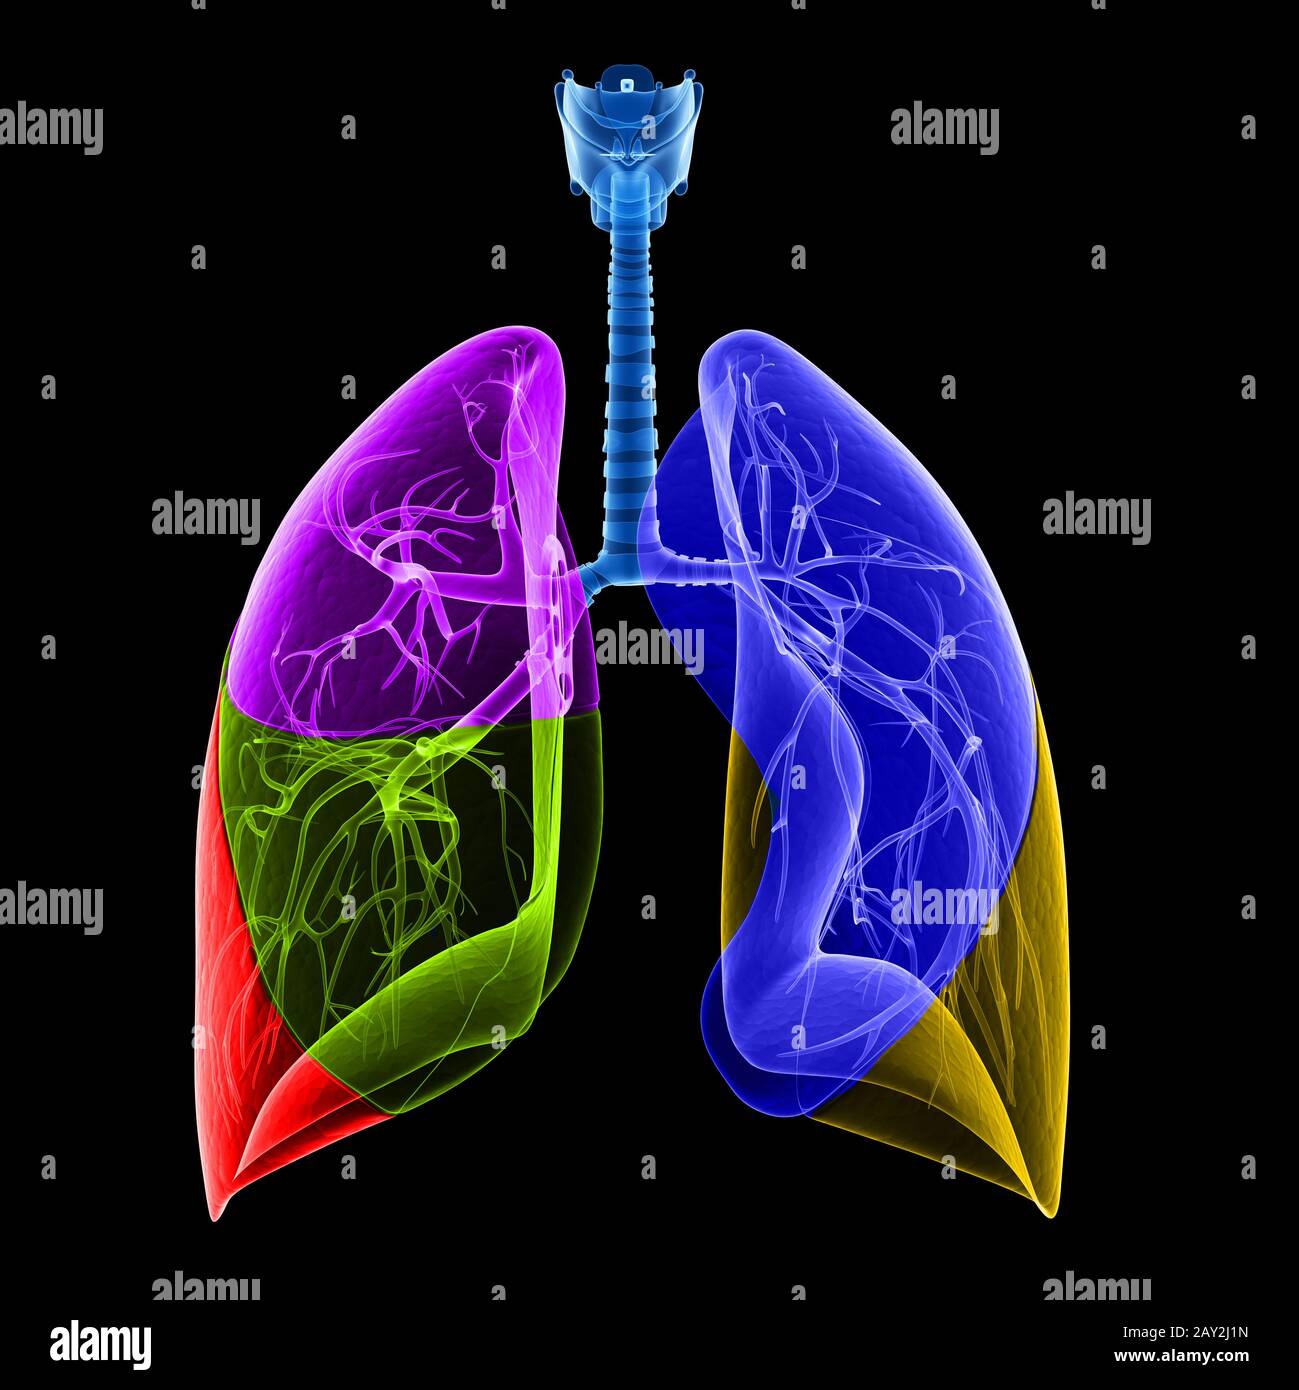 medical illustration of the lung lobes Stock Photo